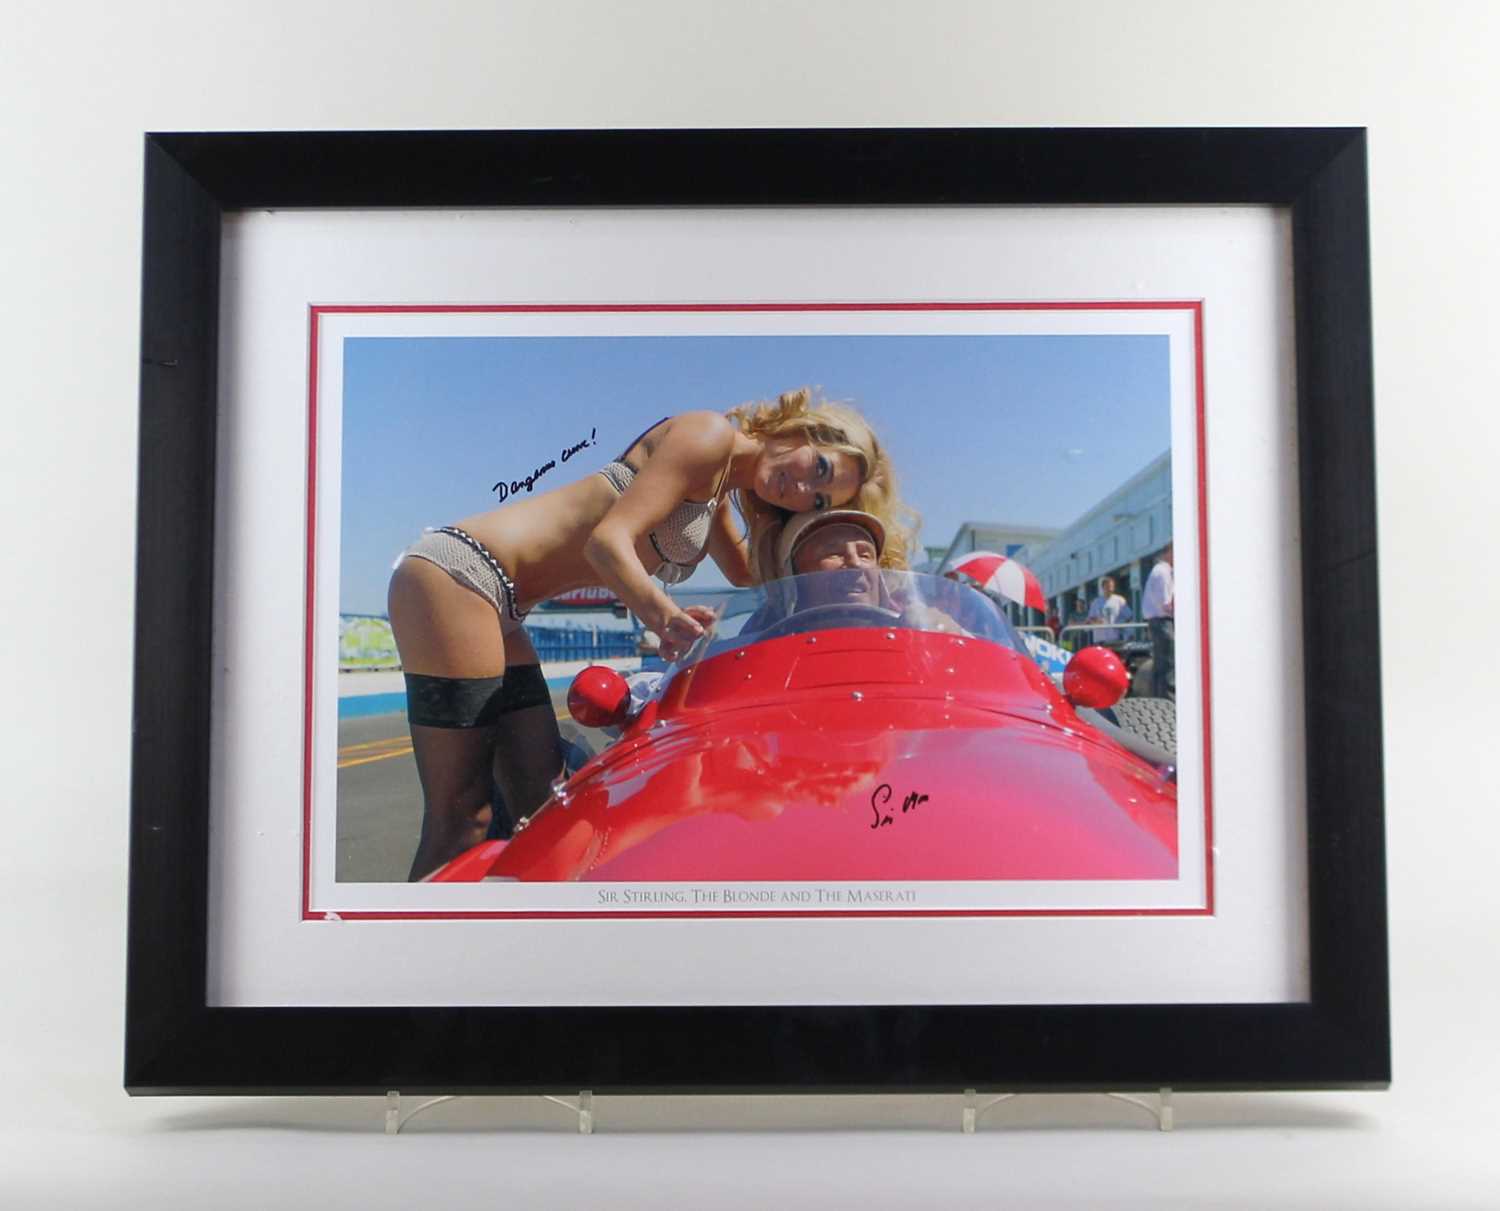 A limited edition photograph with unique one off dedication inscribed 'Dangerous Curves' and